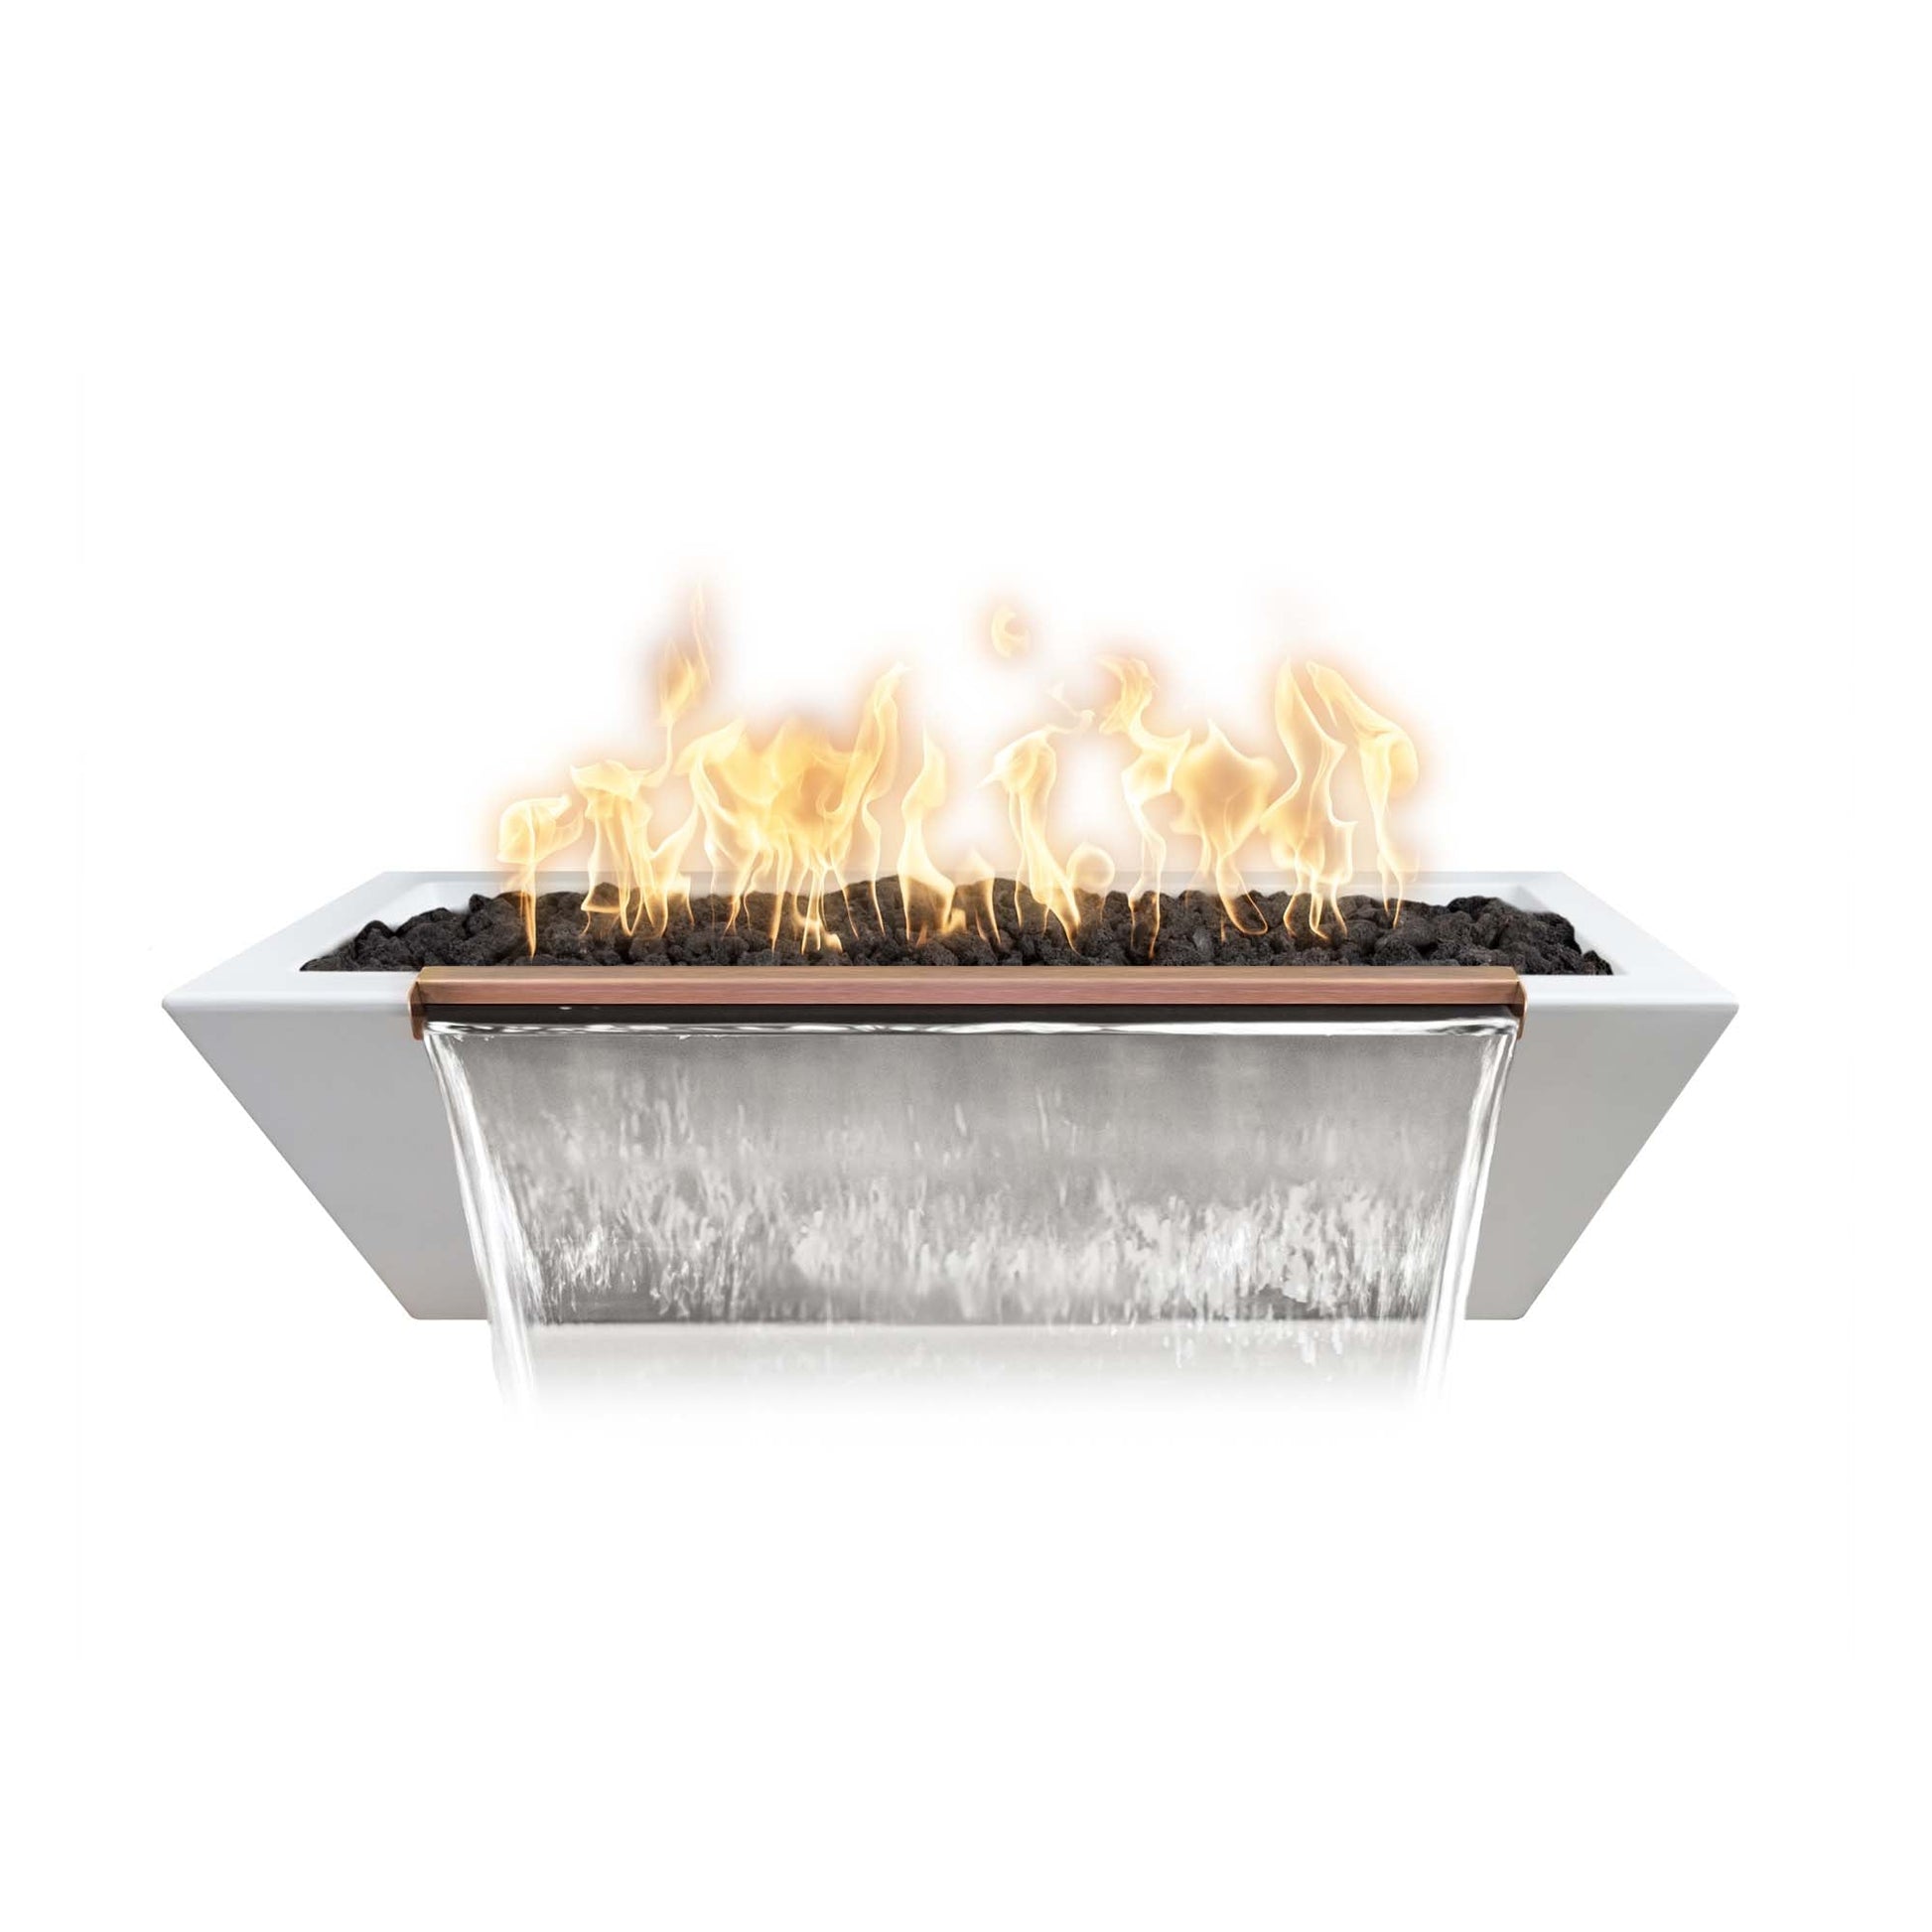 The Outdoor Plus Linear Maya 60" Ash GFRC Concrete Liquid Propane Fire & Water Bowl with Match Lit with Flame Sense Ignition